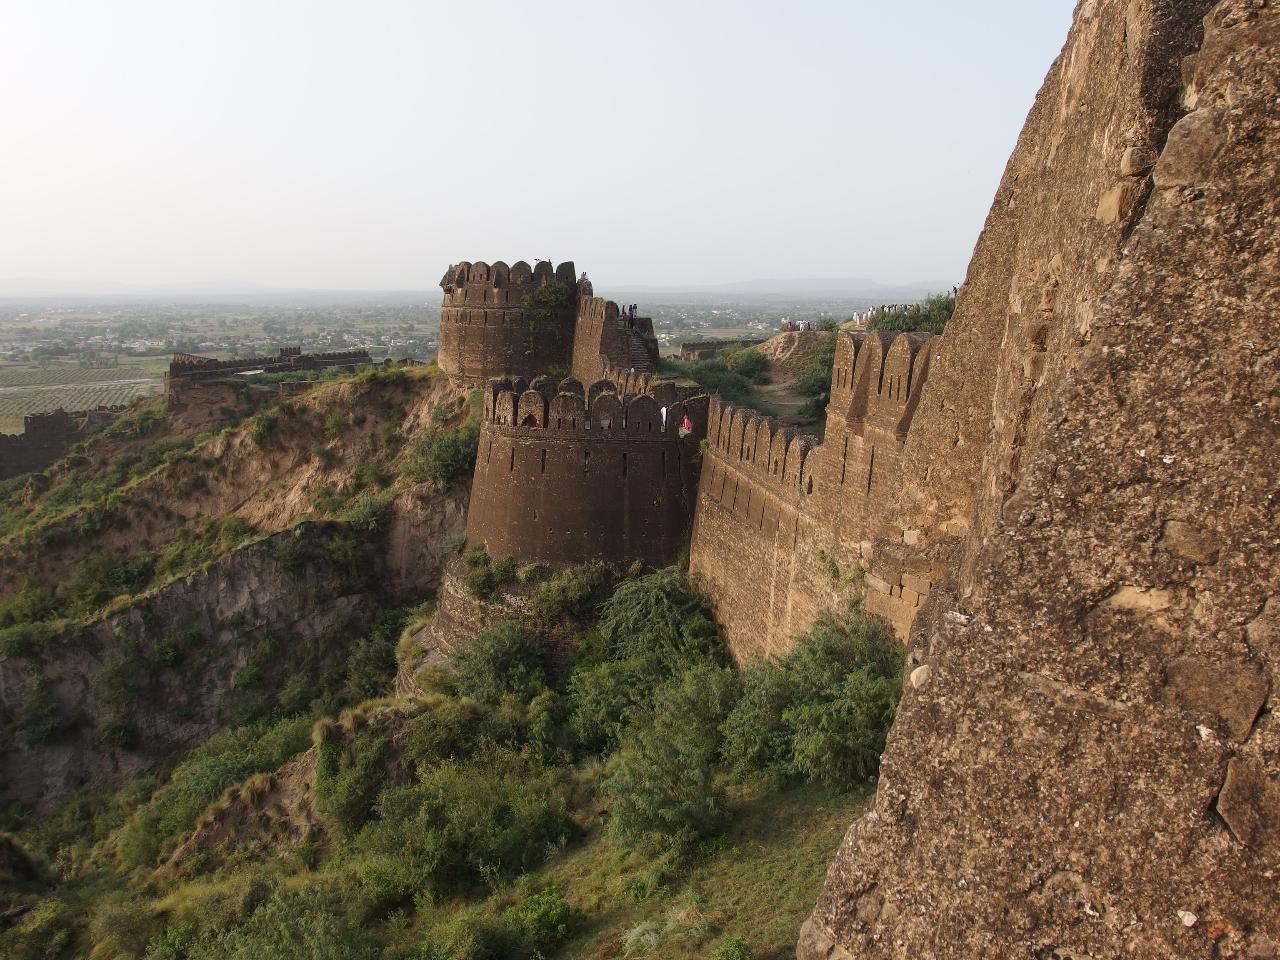 Day Tour to Rohtas Fort and Khewra Salt Mines from Islamabad